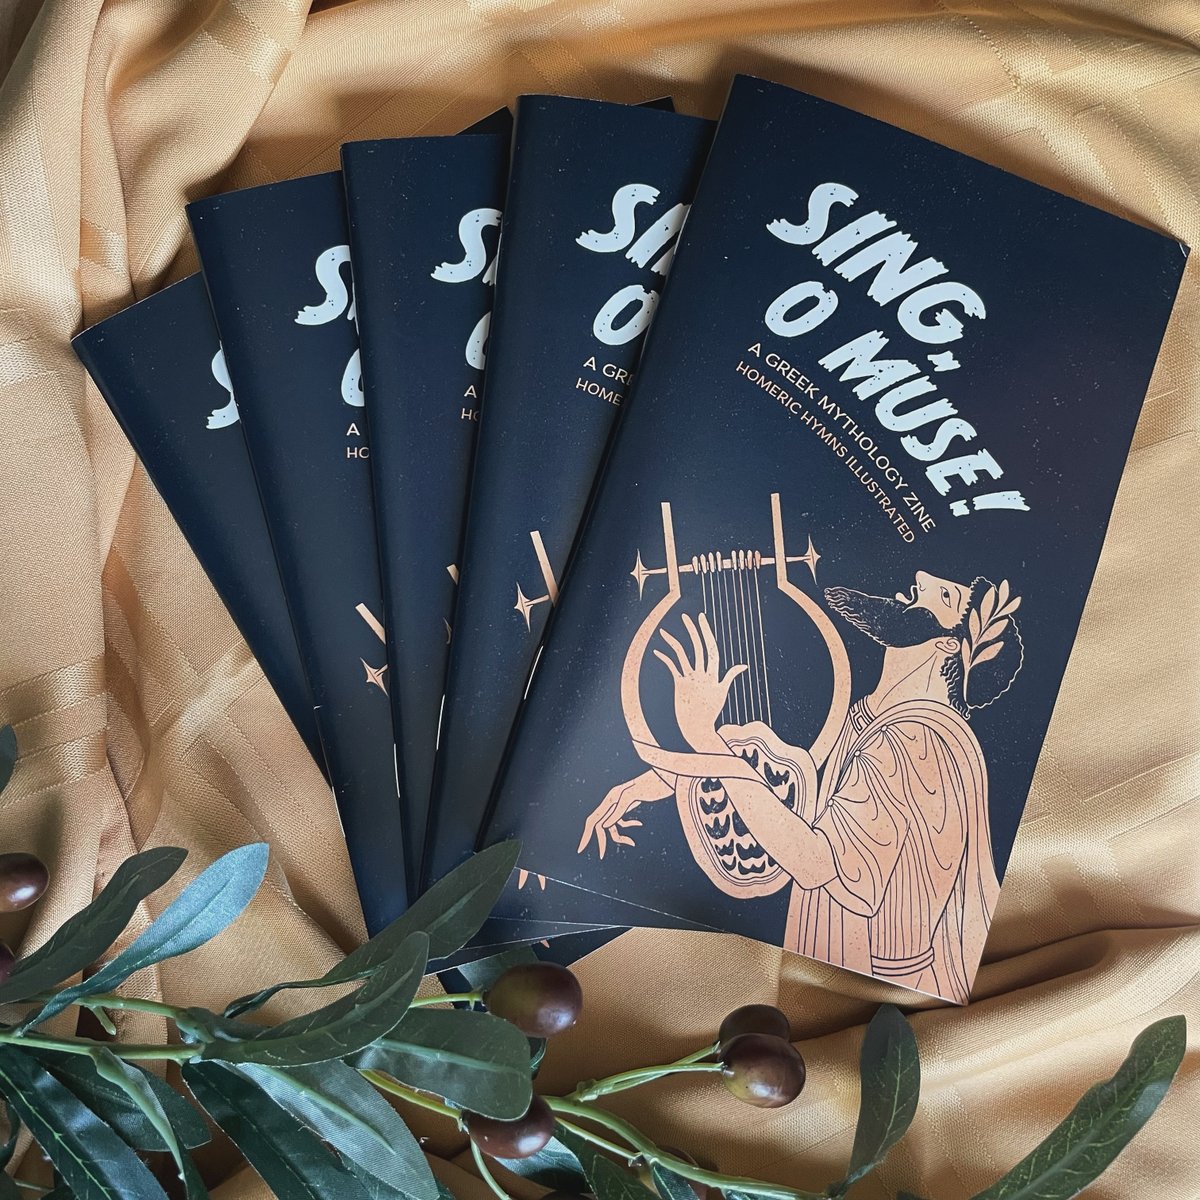 Today celebrates one month sine the release of Sing, O Muse! Thank you to everyone who has supported us by purchasing the zine, engaging with our posts, and posting photos of your own copies. We wouldn’t be here without you! 🤎🎉 #SingOMuseZine